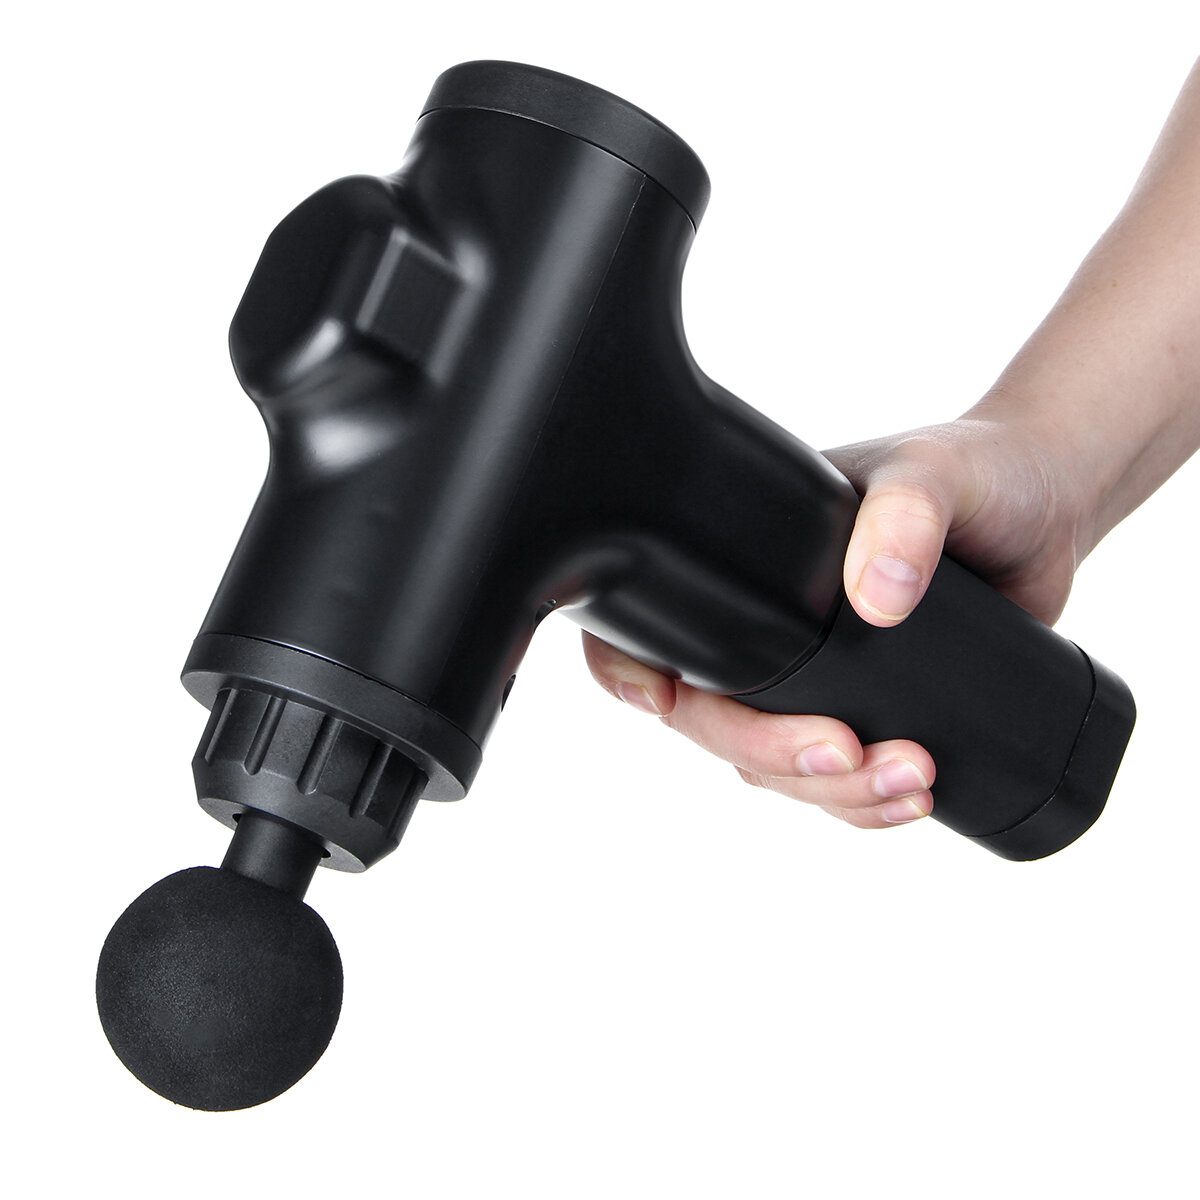 

2500mAh Electric Percussion Massage Guns 6 Speeds Low Noise Vibration Muscle Body Therapy Device with 4 Massage Heads